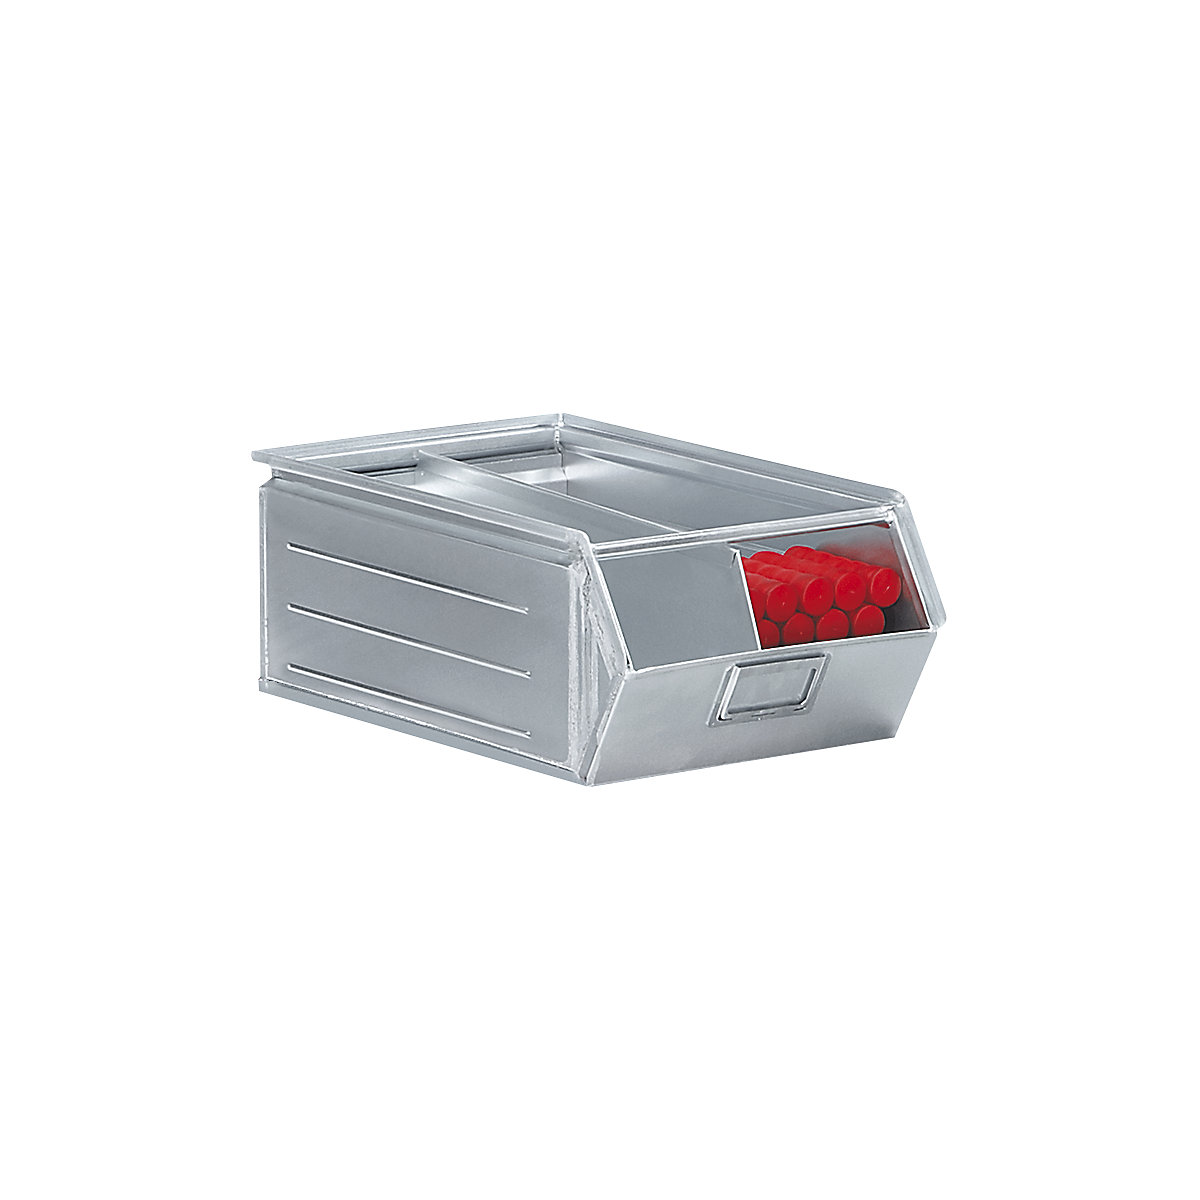 Open fronted storage bin made of sheet steel, LxWxH 515 x 310 x 200 mm, with support rod, zinc plated-4